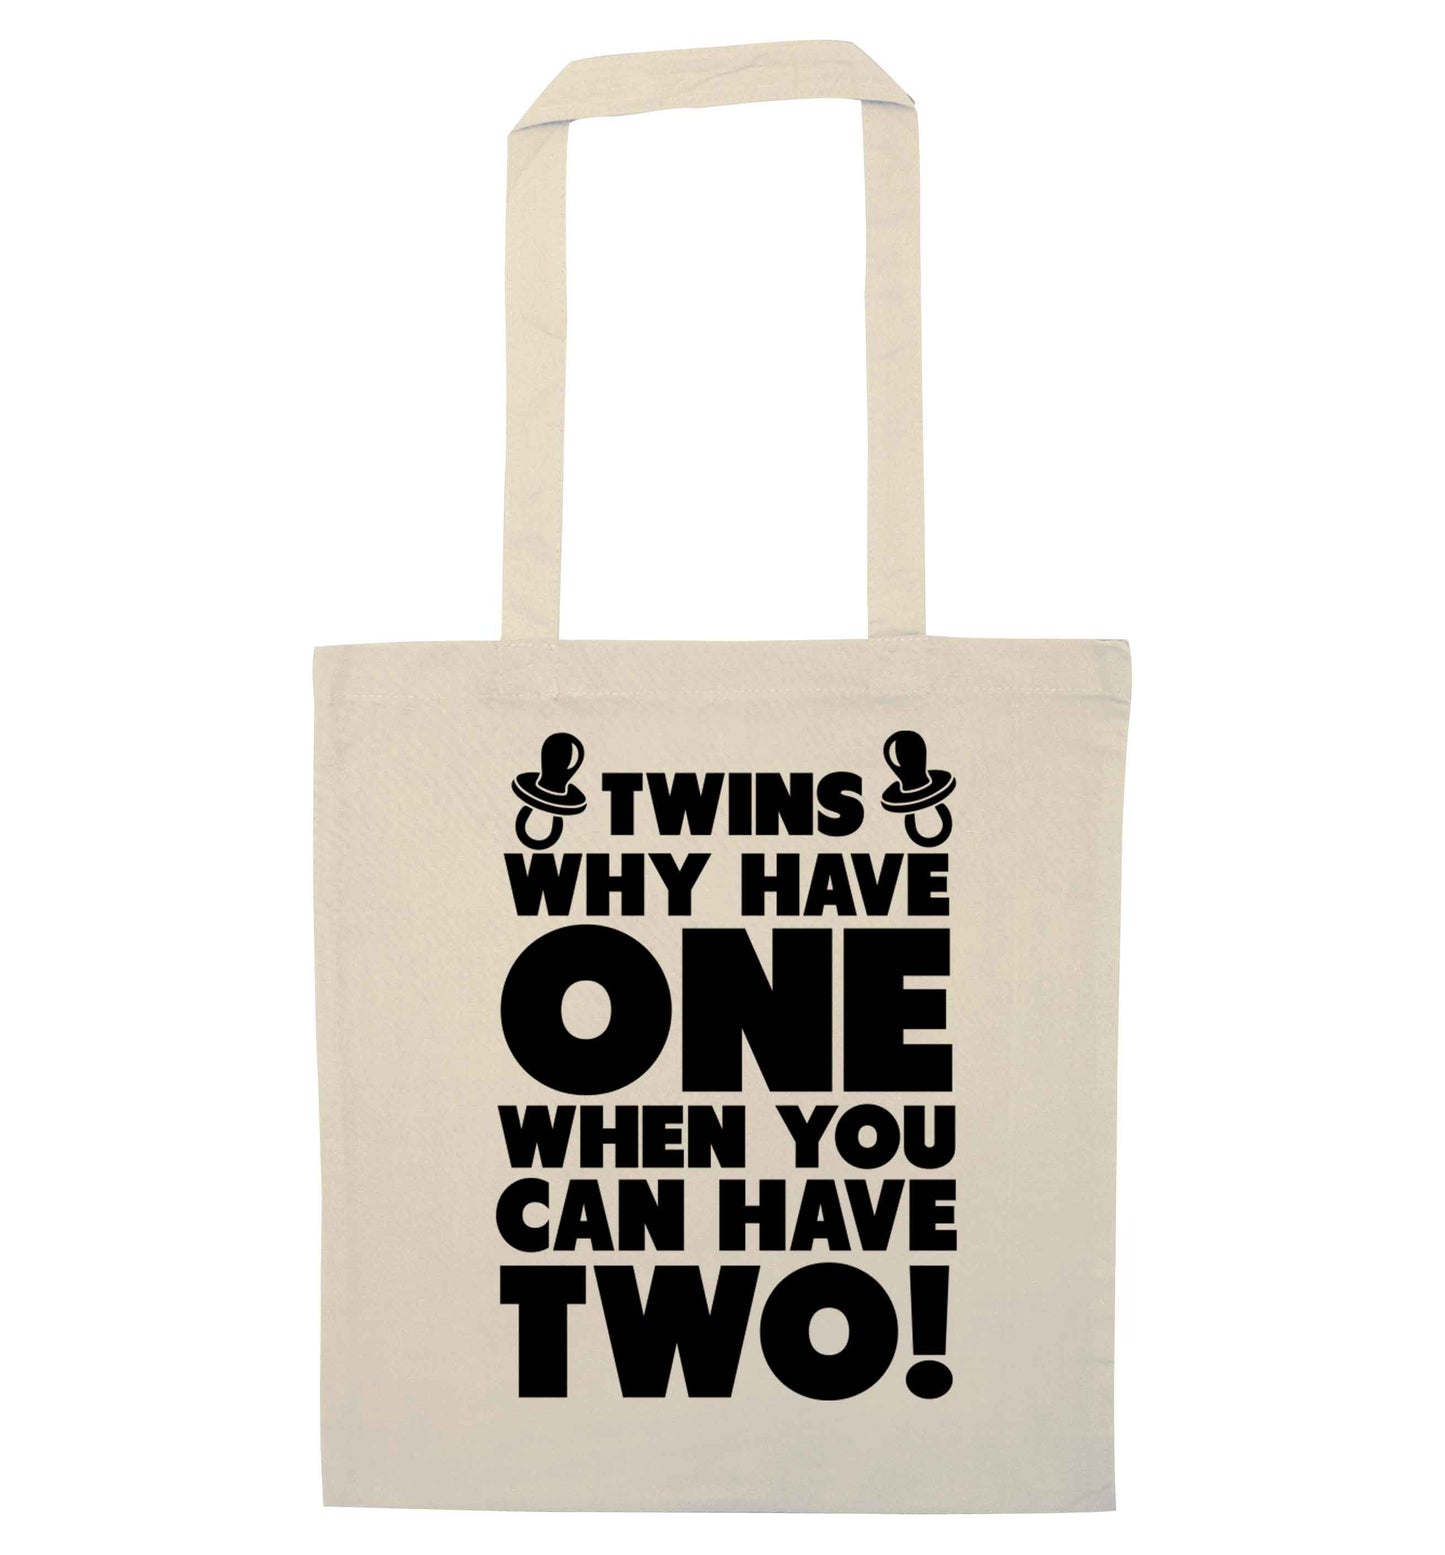 Twins why have one when you can have two natural tote bag